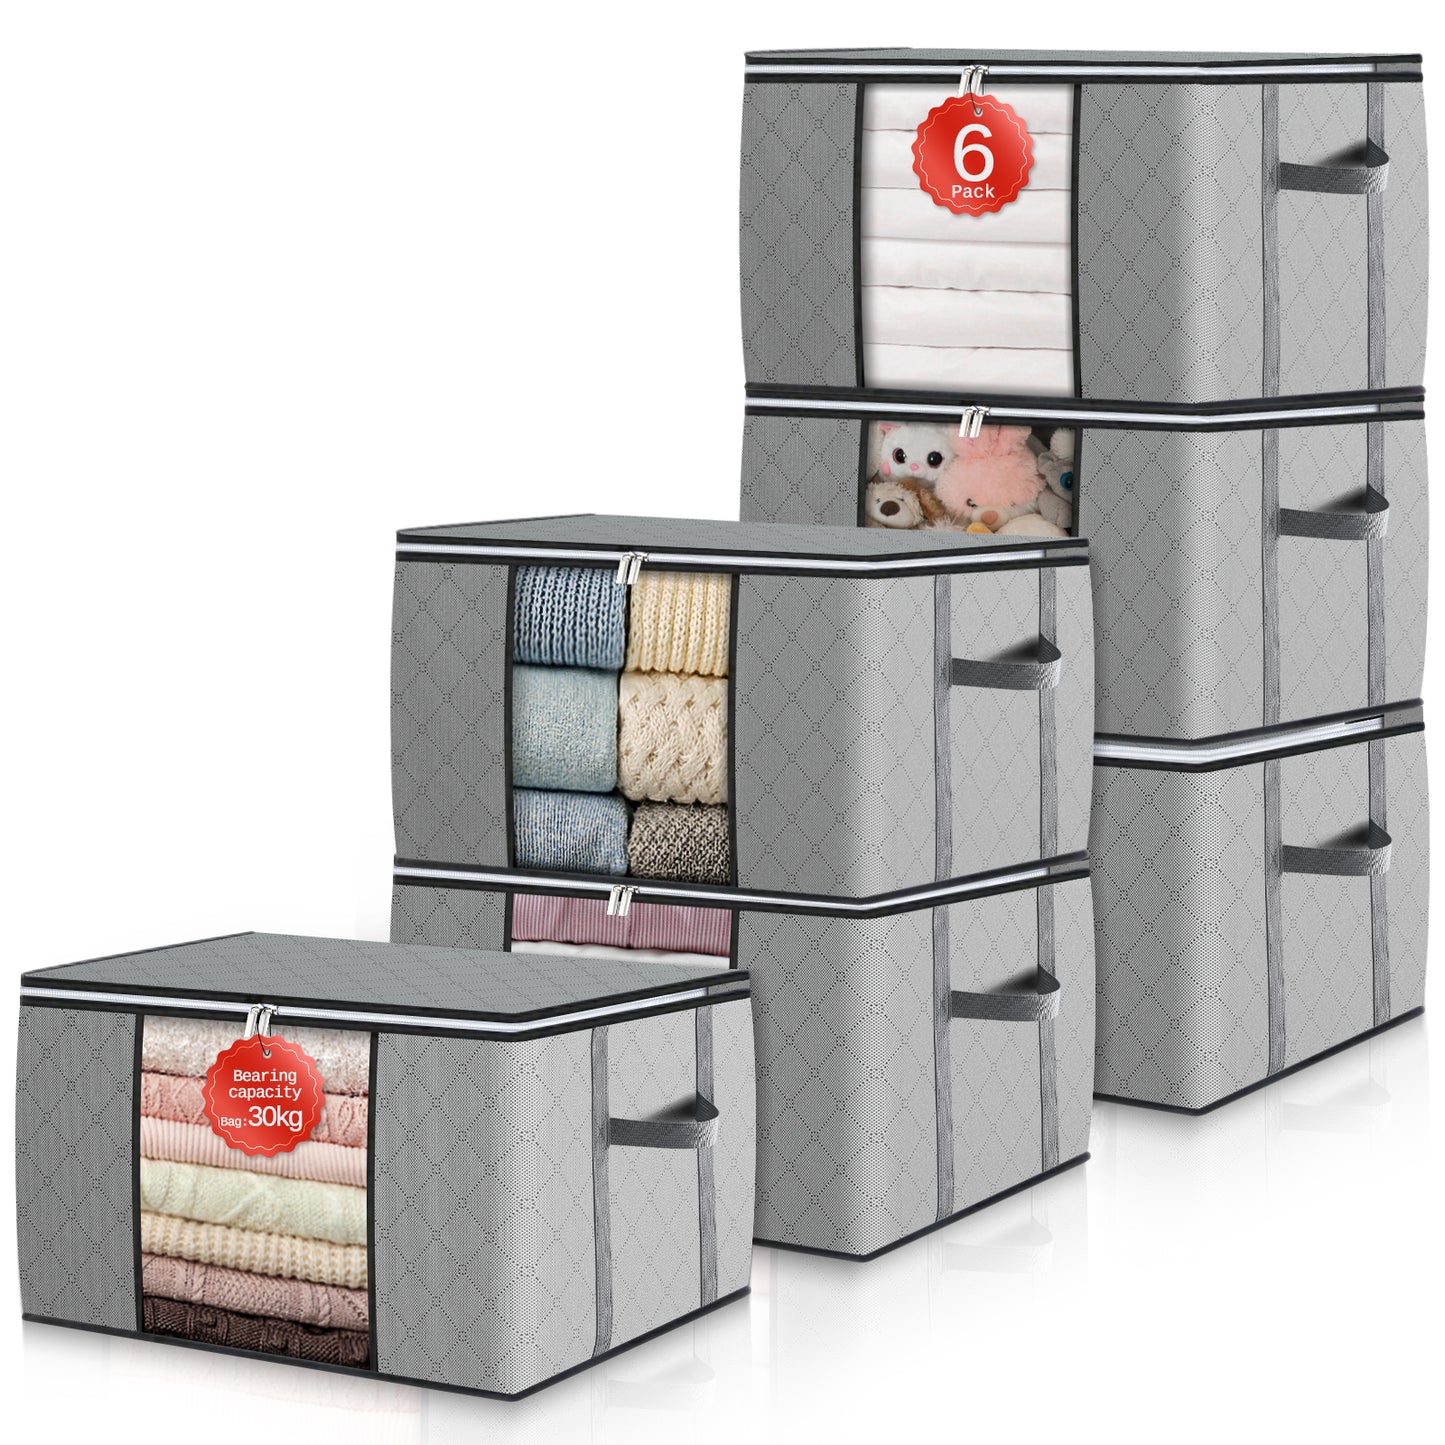 GoMaihe Clothes Storage Bags 6 Pack, Foldable Storage Bins Closet Organizers Stackable Containers with Reinforced Handles and Lids, Grid Gray